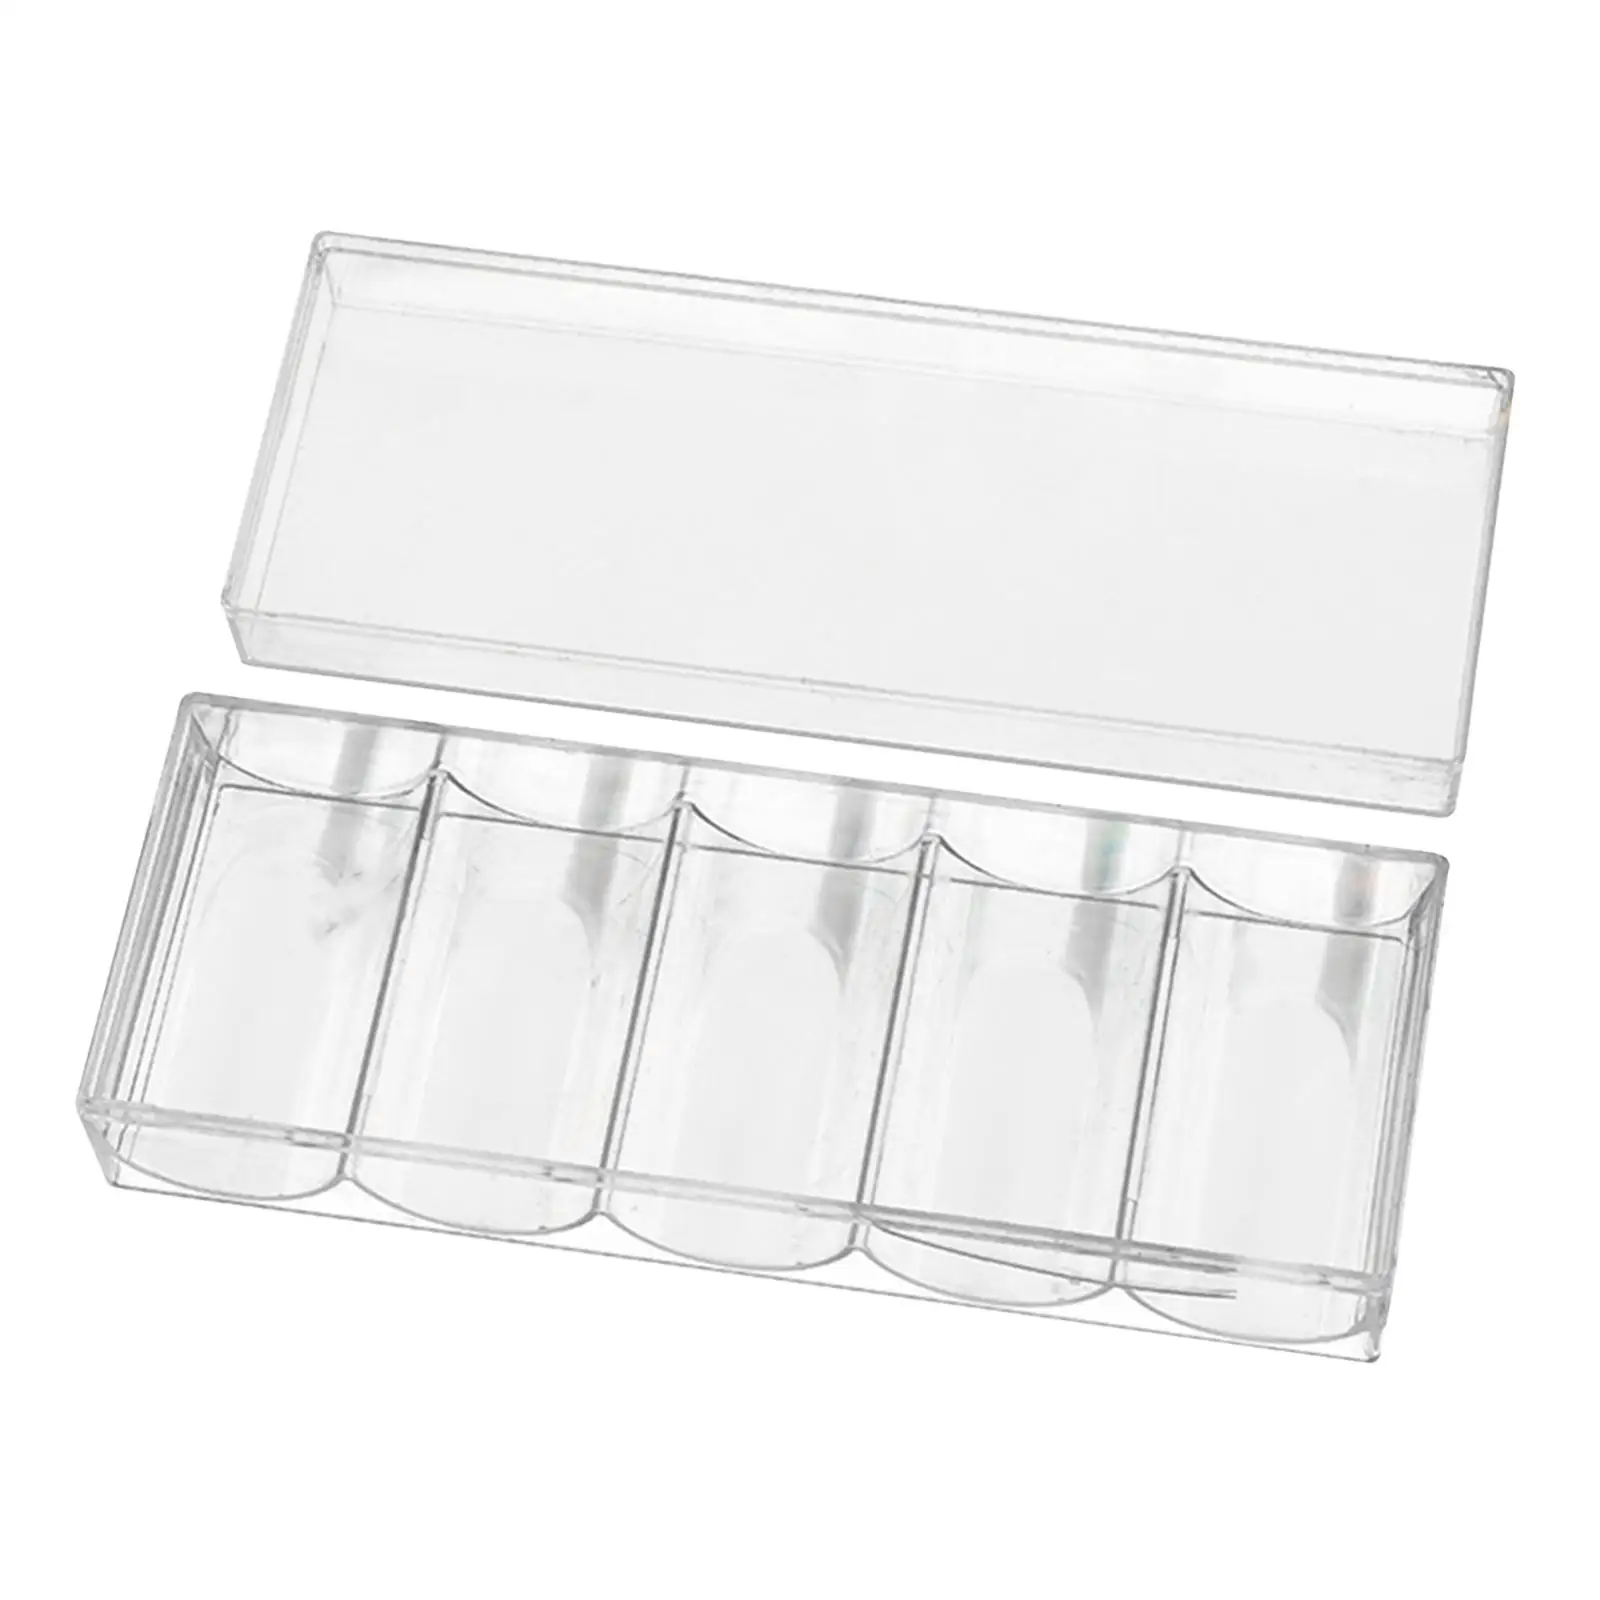 Clear Chips Tray with Lid Dustproof Sturdy 5 Grids Acrylic Chip Holder Chip Organizer Chip Caddy for Tabletop Game Parties